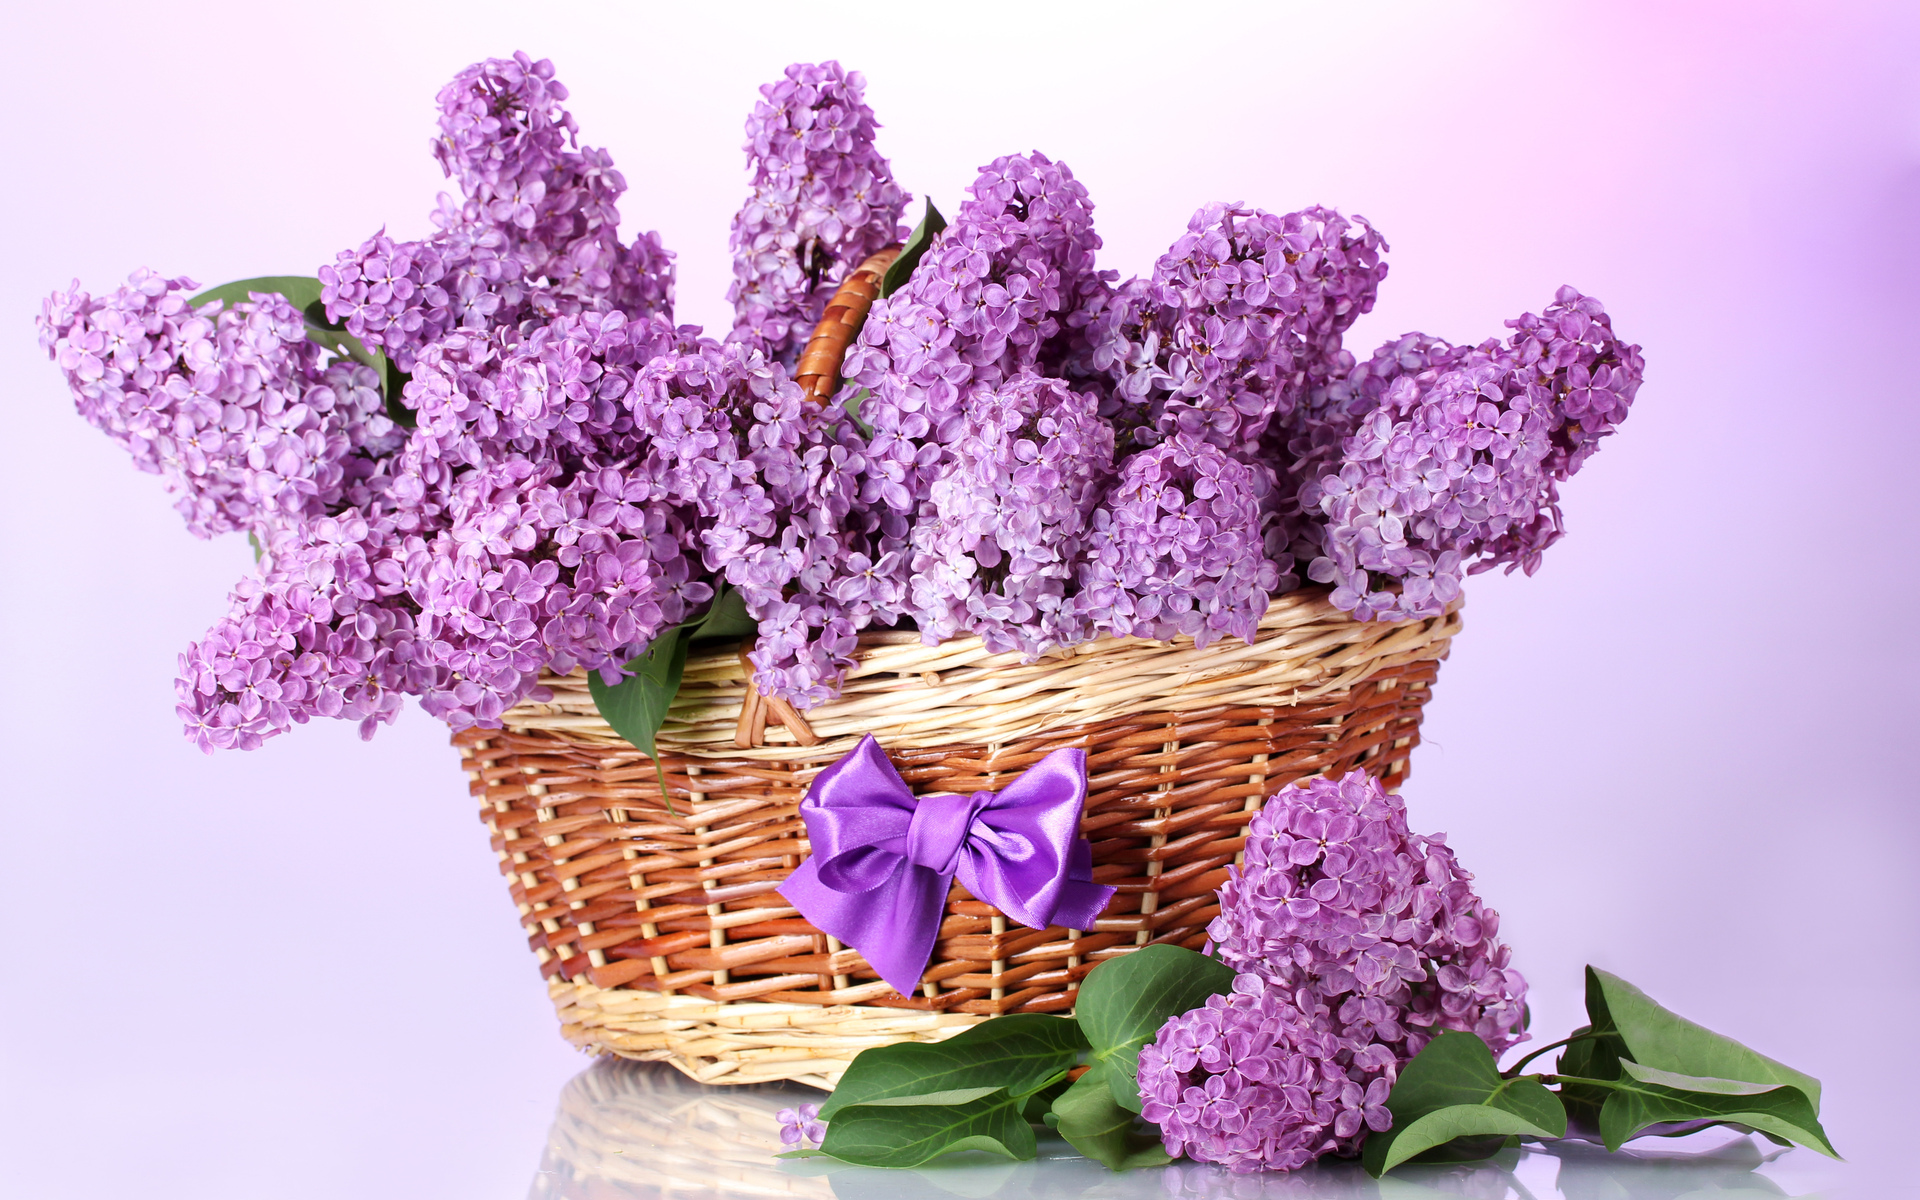 bow, Basket, Leaves, Flowers, Branches, Lilac, Spring Wallpaper